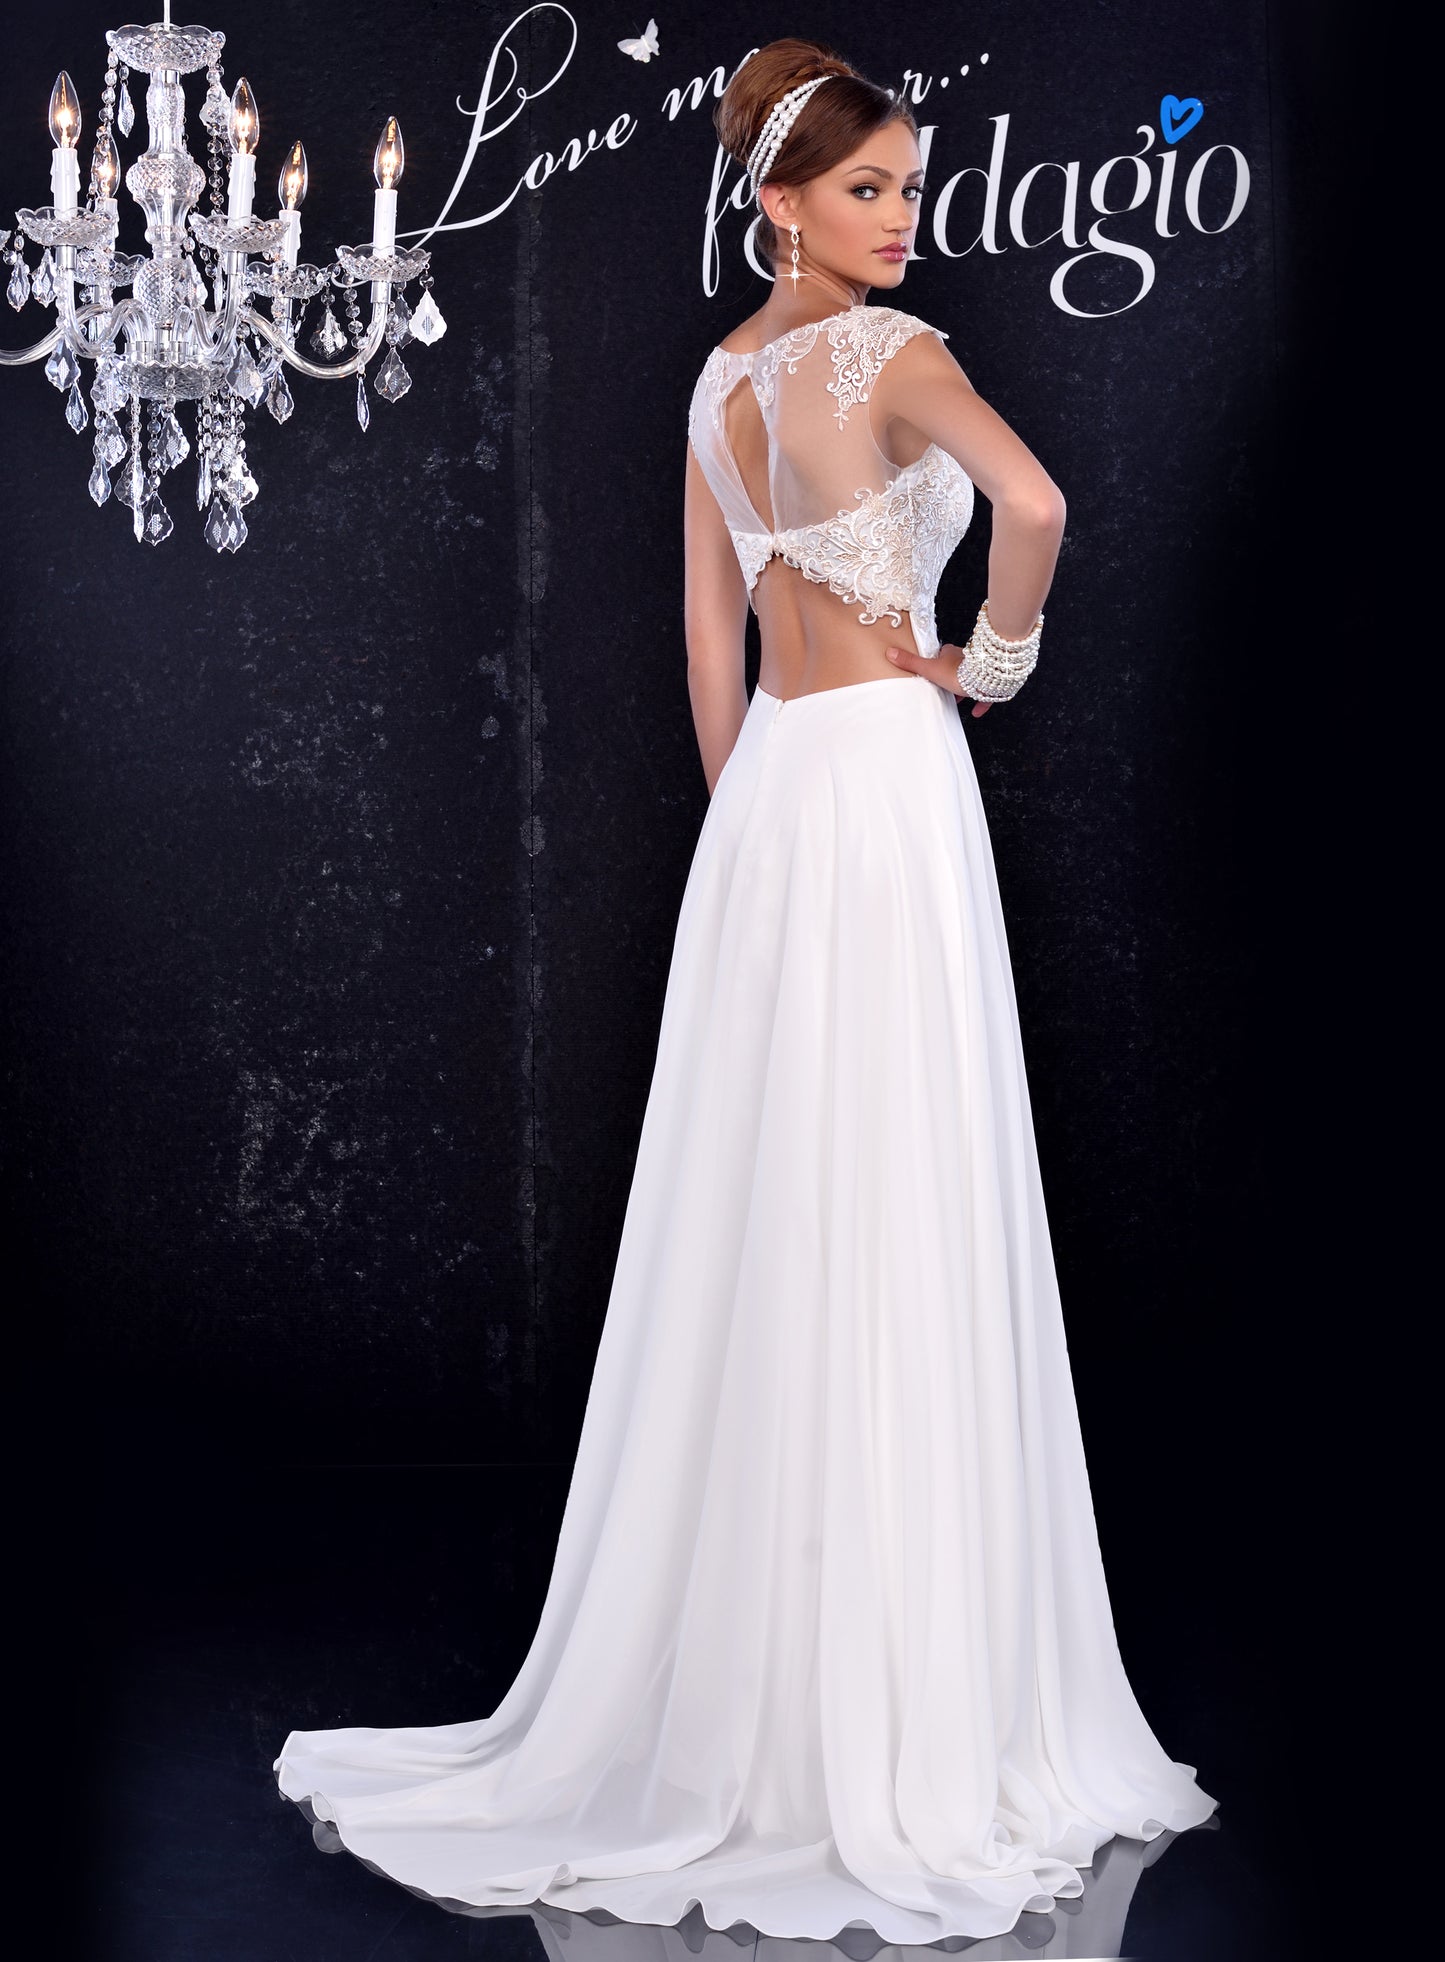 Adagio Bridal D9143 is a chiffon wedding dress with a sheer lace top & an open back cut out design.  sleeveless embroidered bodice flowing chiffon a line destination Bridal Gown. Wedding Dress Destination Wedding Dress   Colors: Ivory  Size: 10  Category:  Wedding Dresses, Bridal Gowns, Destination Bridal Dresses